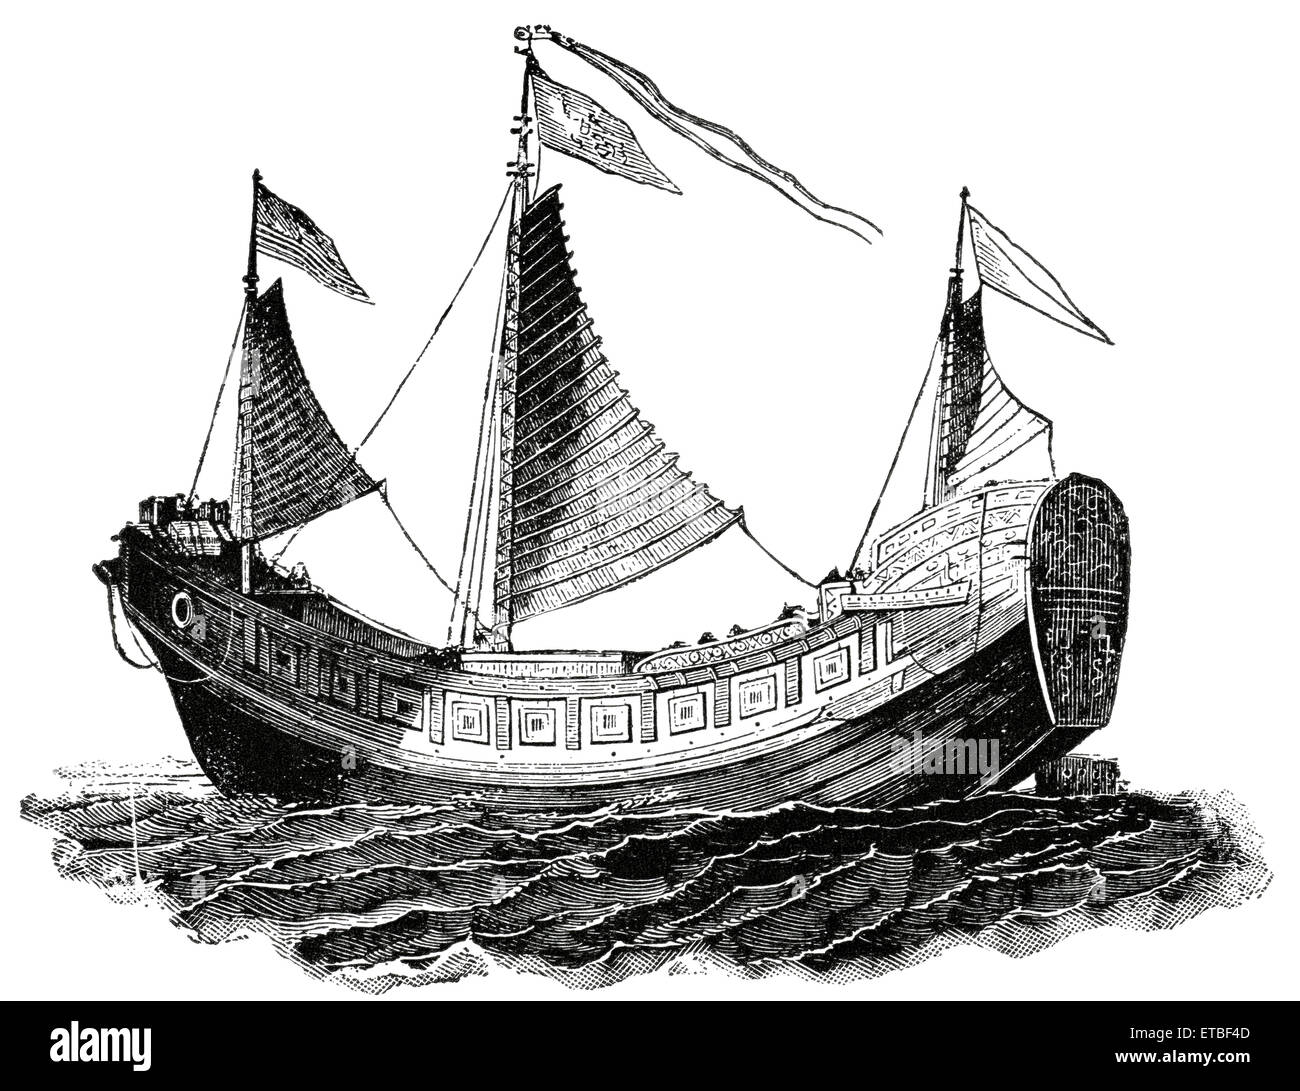 Chinese Junk used for Passengers and Freight, 'Classical Portfolio of Primitive Carriers', by Marshall M. Kirman, World Railway Publ. Co., Illustration, 1895 Stock Photo